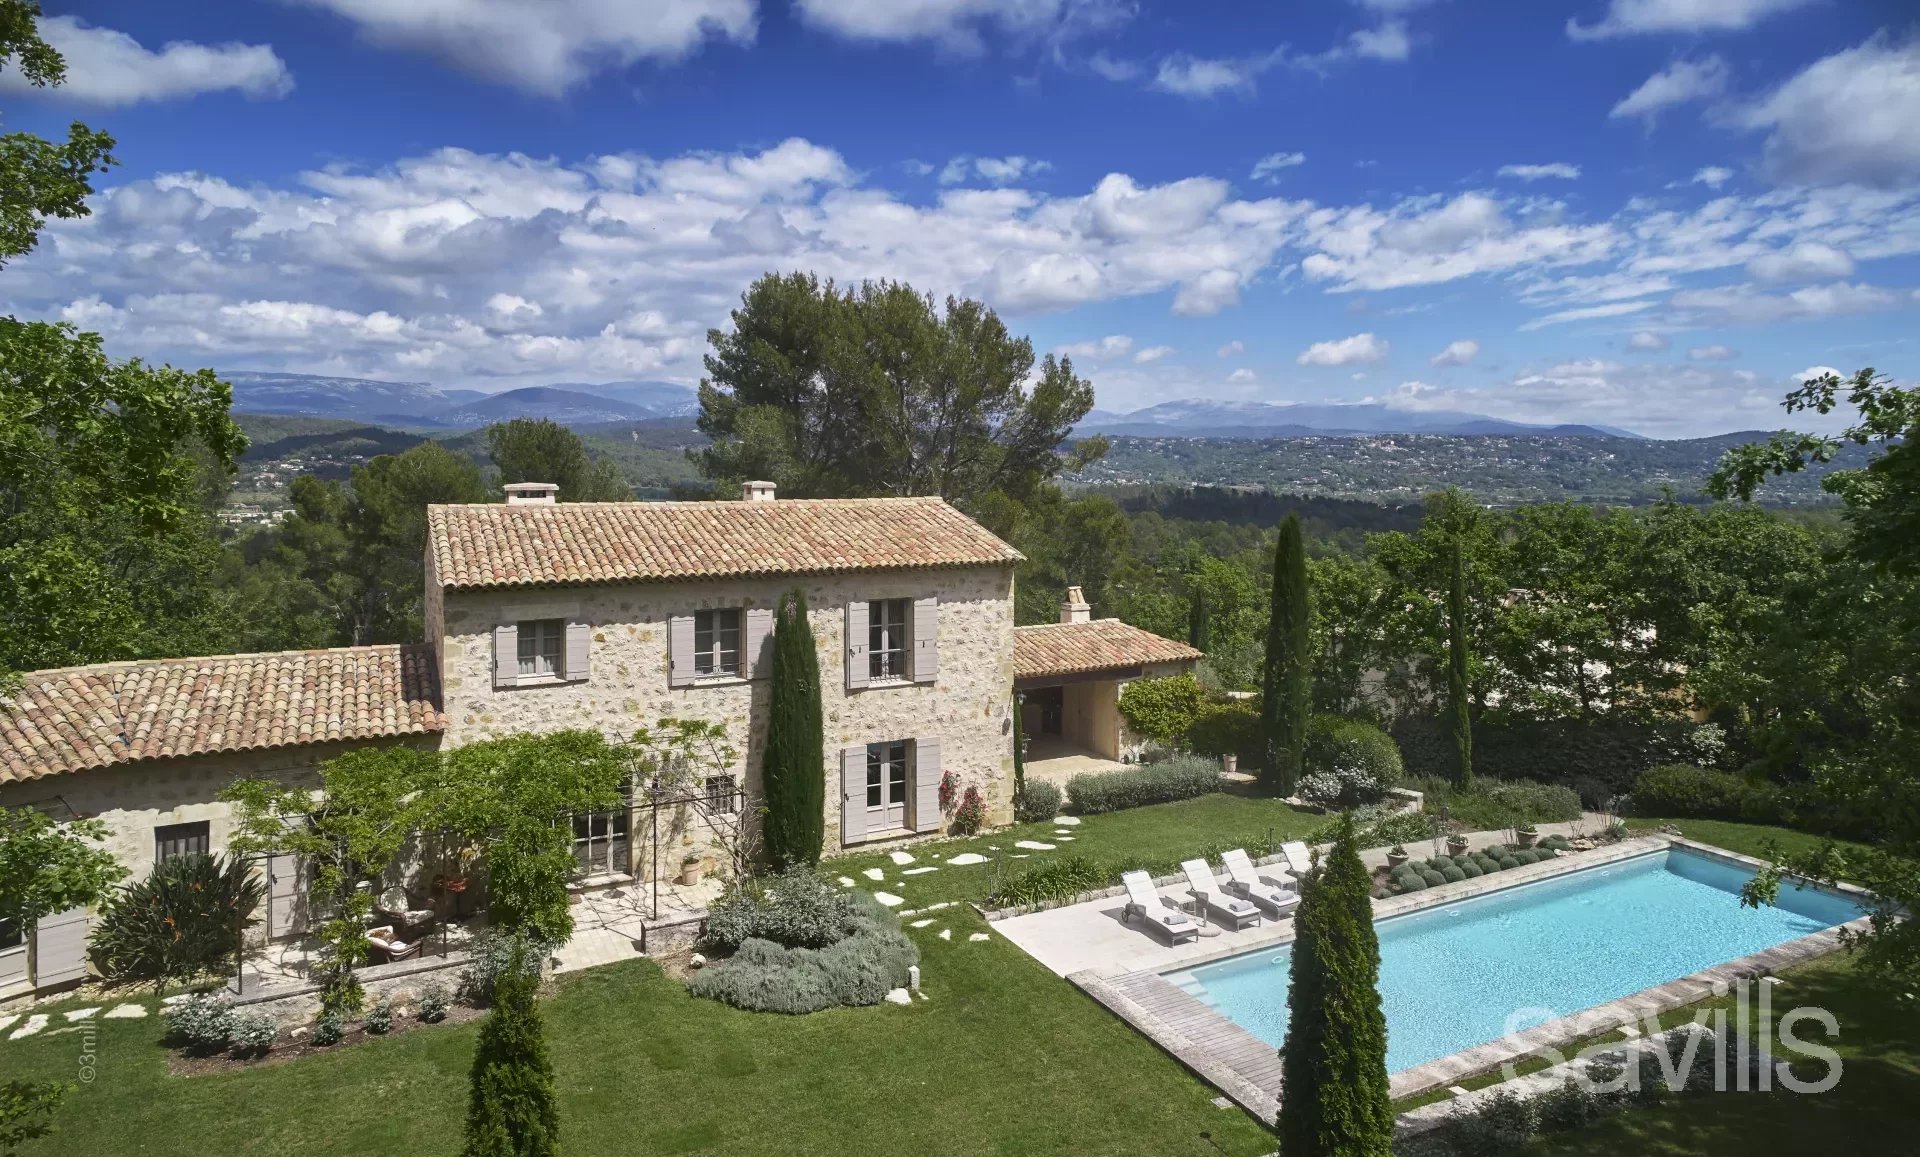 4 bedroom stone villa with double exposure and a heated swimming pool, within the sought-after private domain Terre Blanche. For sale via Savills French Riviera